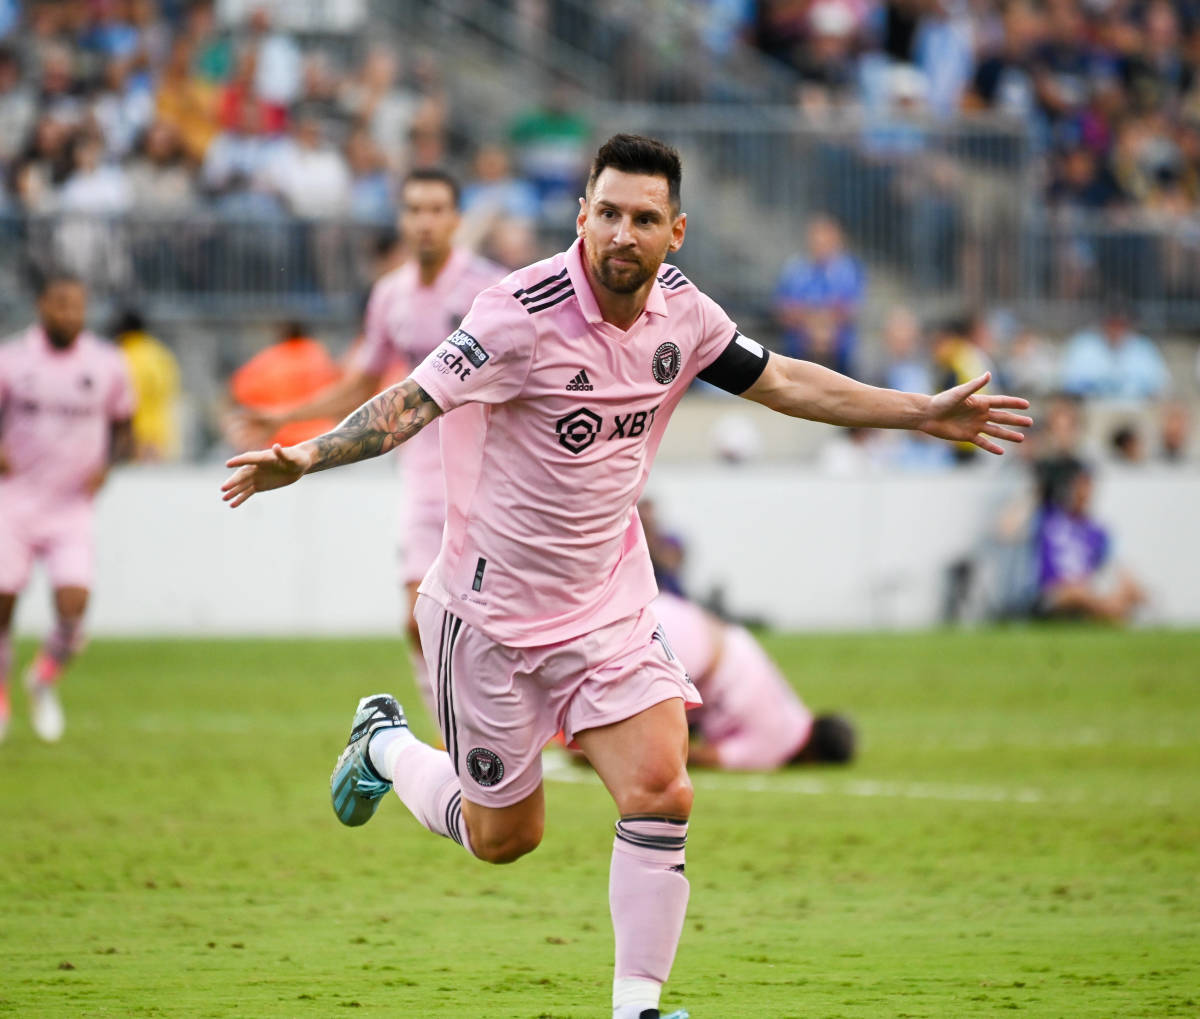 Lionel Messi pictured celebrating after scoring a goal for Inter Miami against Philadelphia Union in the semi-finals of the 2023 Leagues Cup